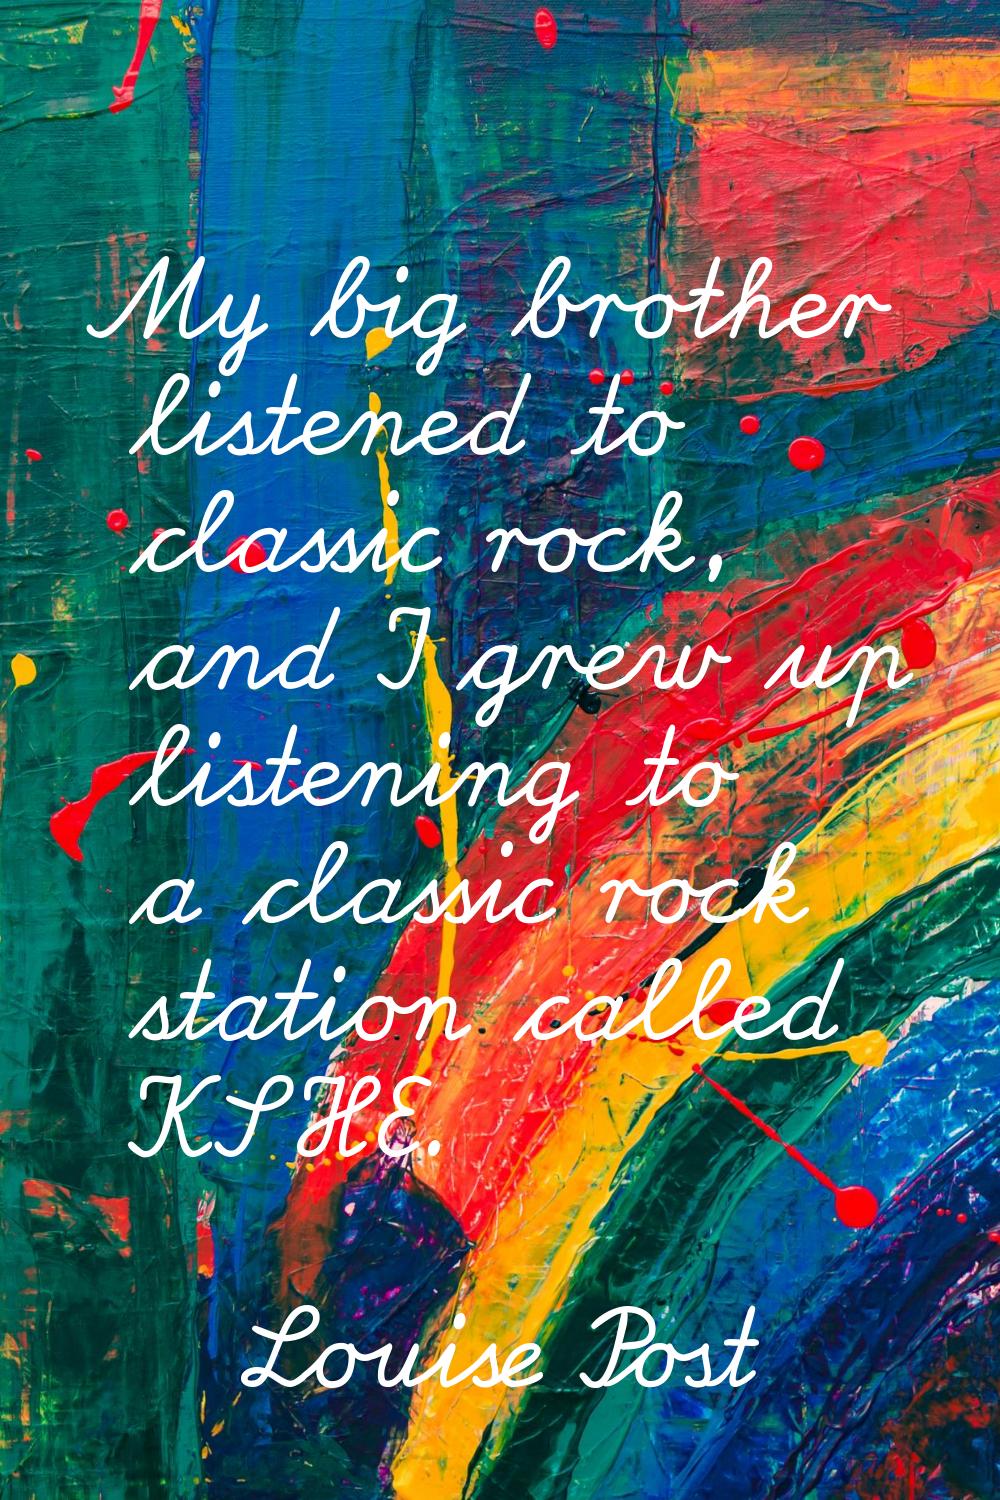 My big brother listened to classic rock, and I grew up listening to a classic rock station called K